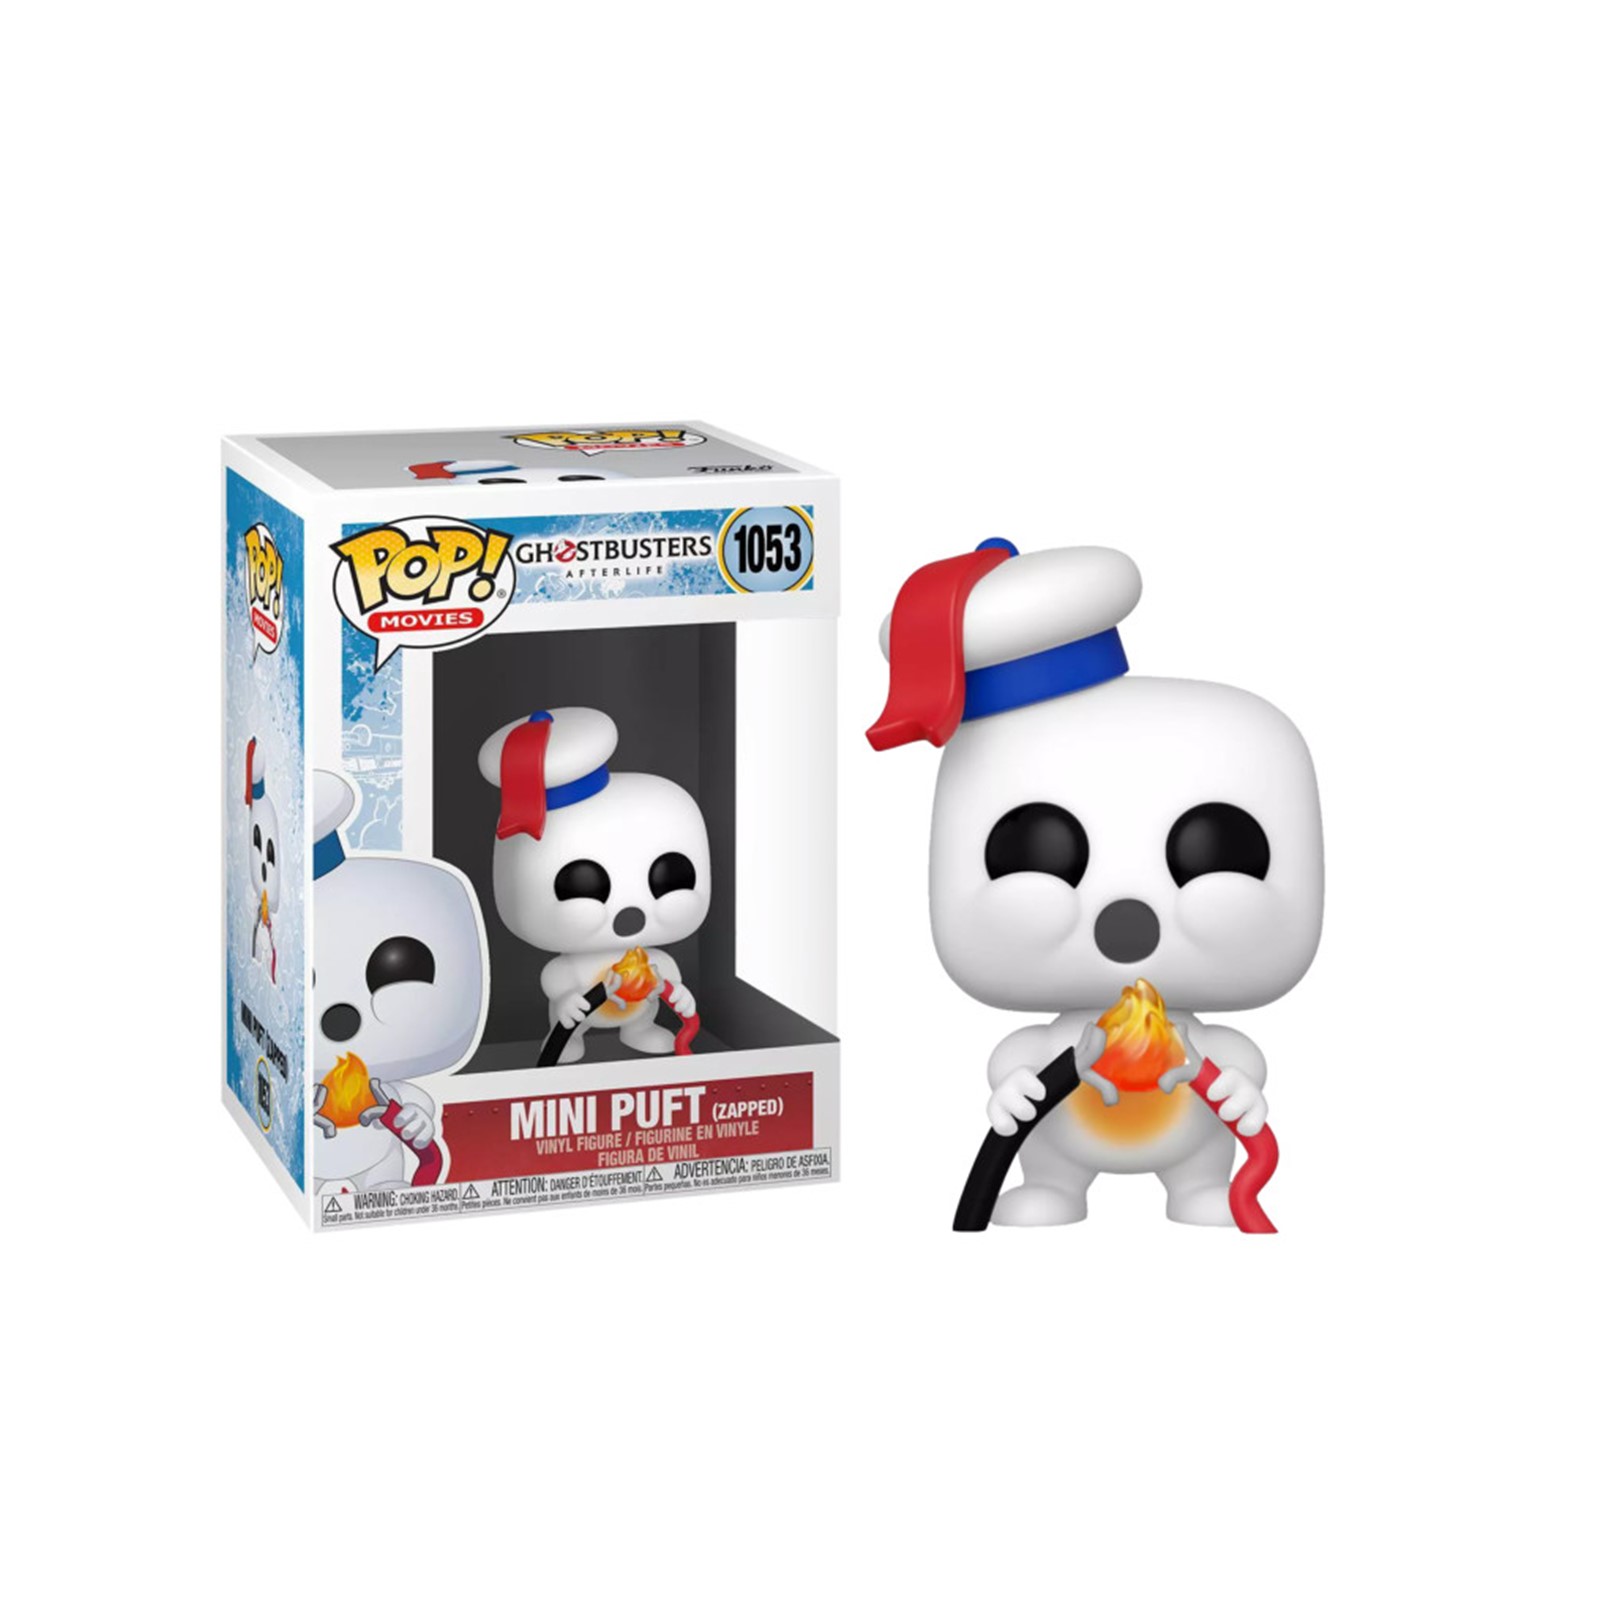 Funko Pop Ghostbusters Afterlife Mini Puft Zapped – 1053